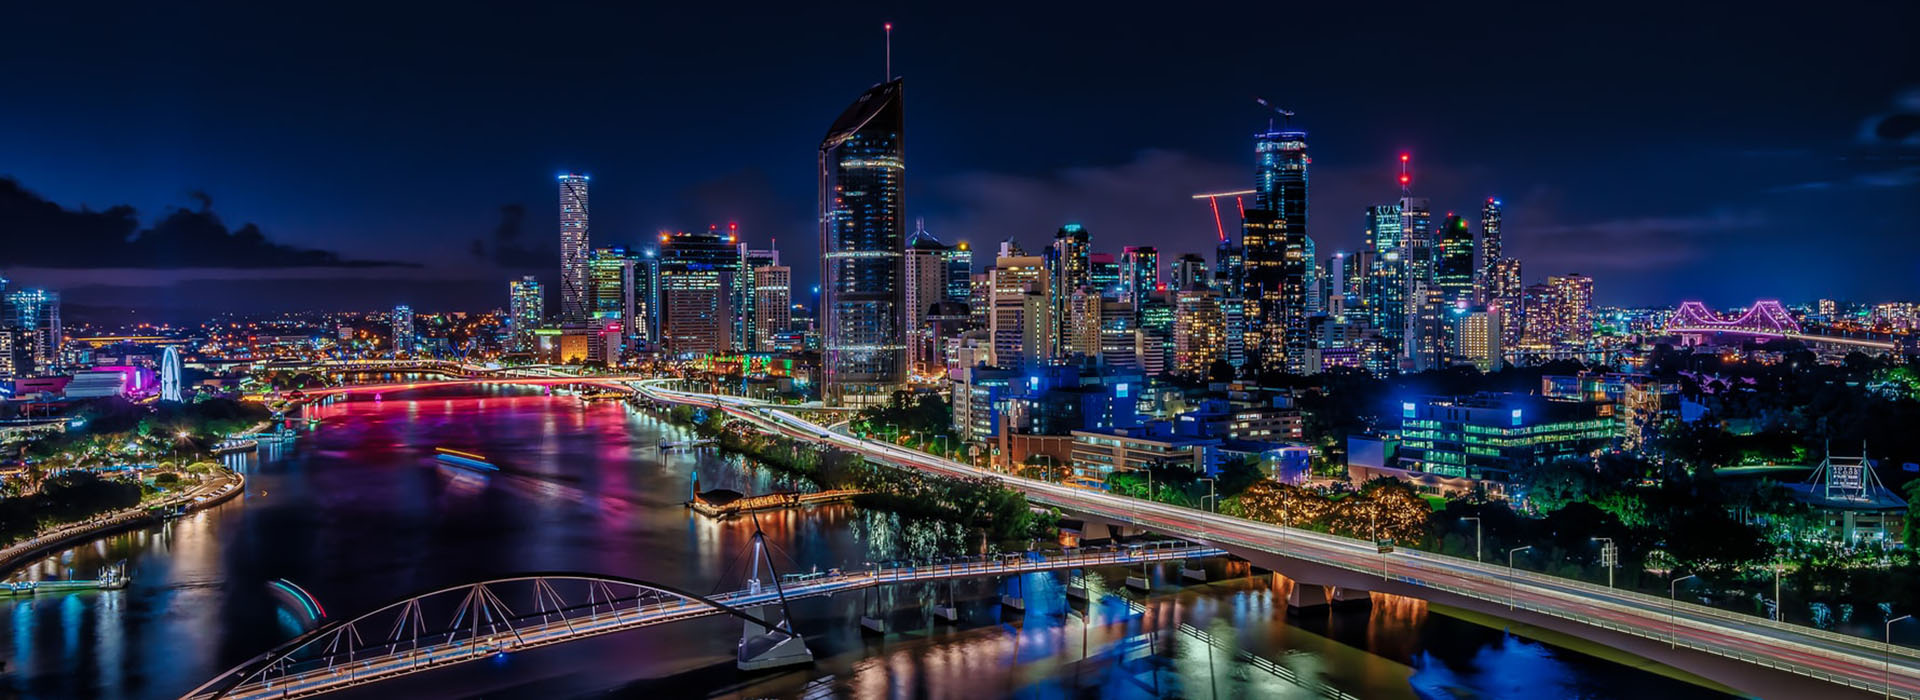 Brisbane City Guide: what to see